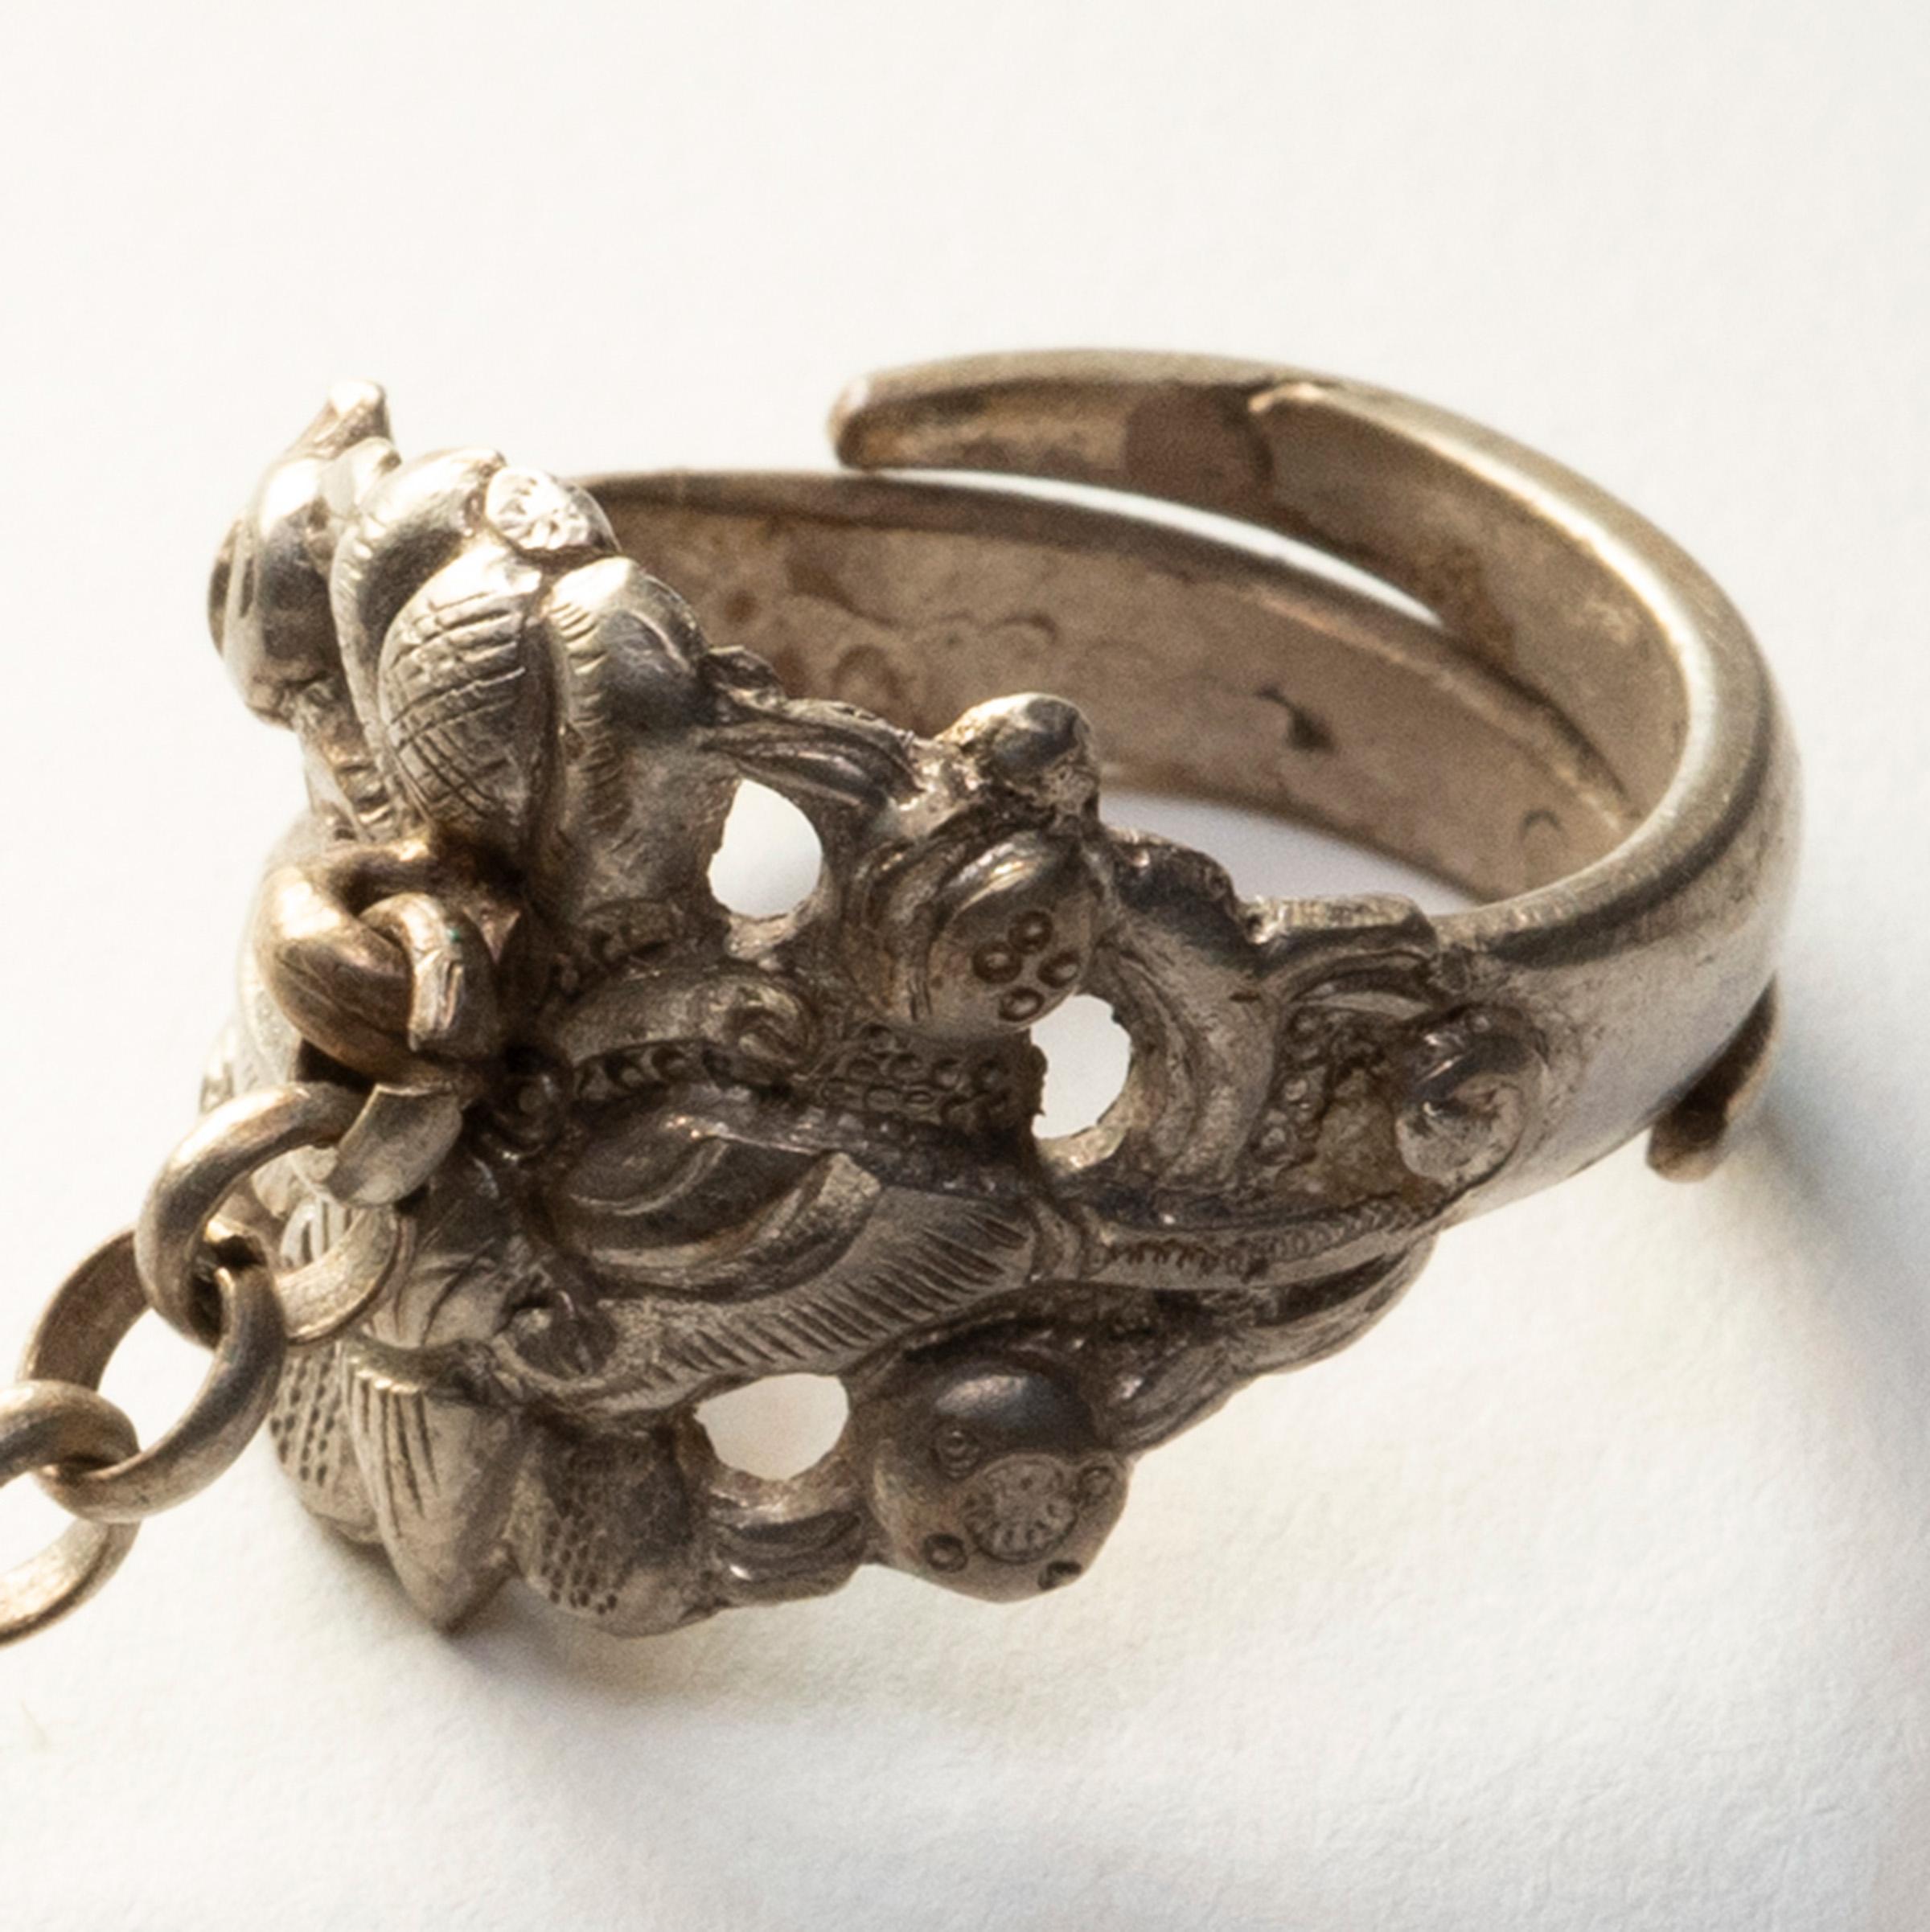 Dated to the late 19th century, this silver charm ring was believed to protect the wearer from bad luck and malevolent spirits. The ring is decorated in relief with a round gourd and a butterfly, surrounded by leaves and small flowers. This motif of